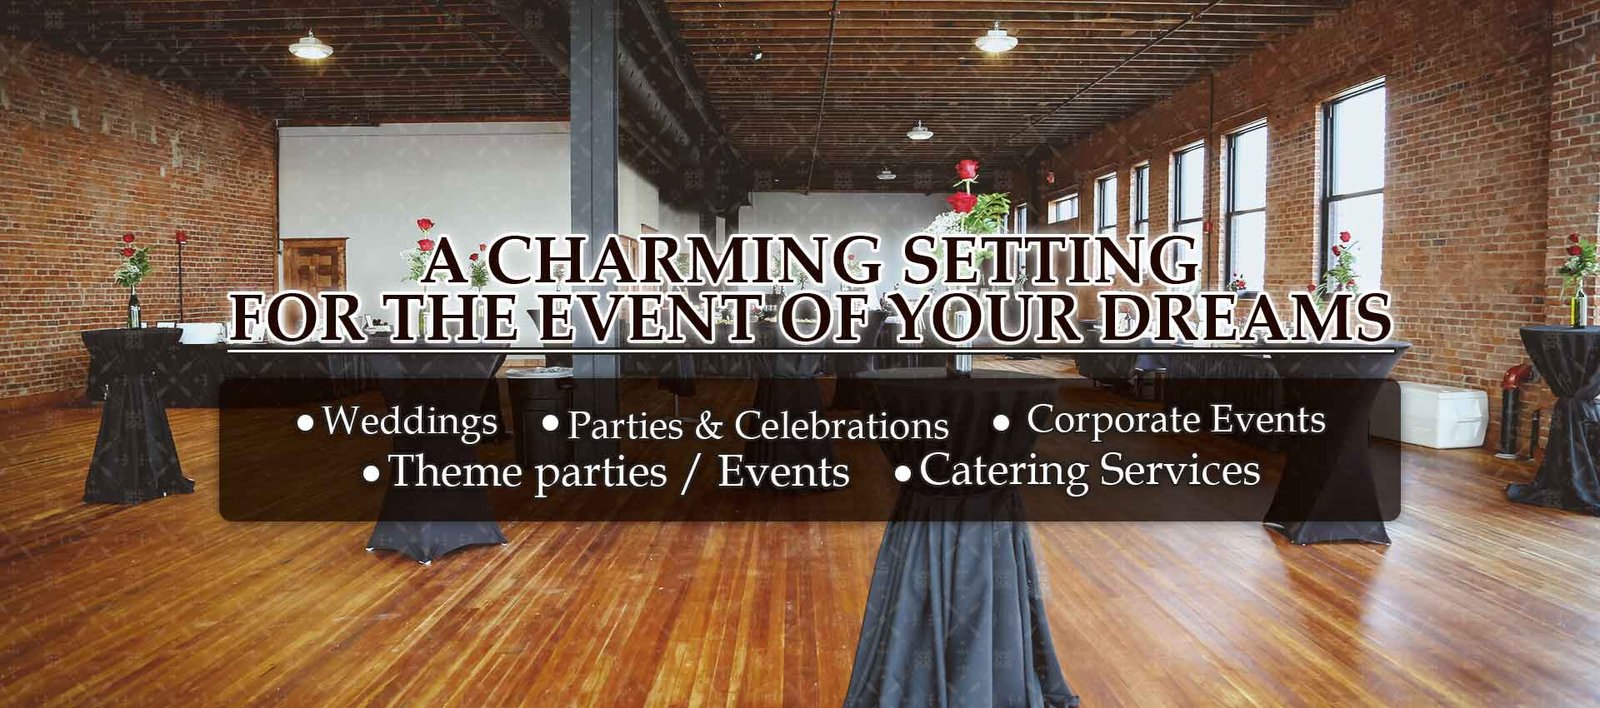 Event Venues for Birthdays in South East Nebraska